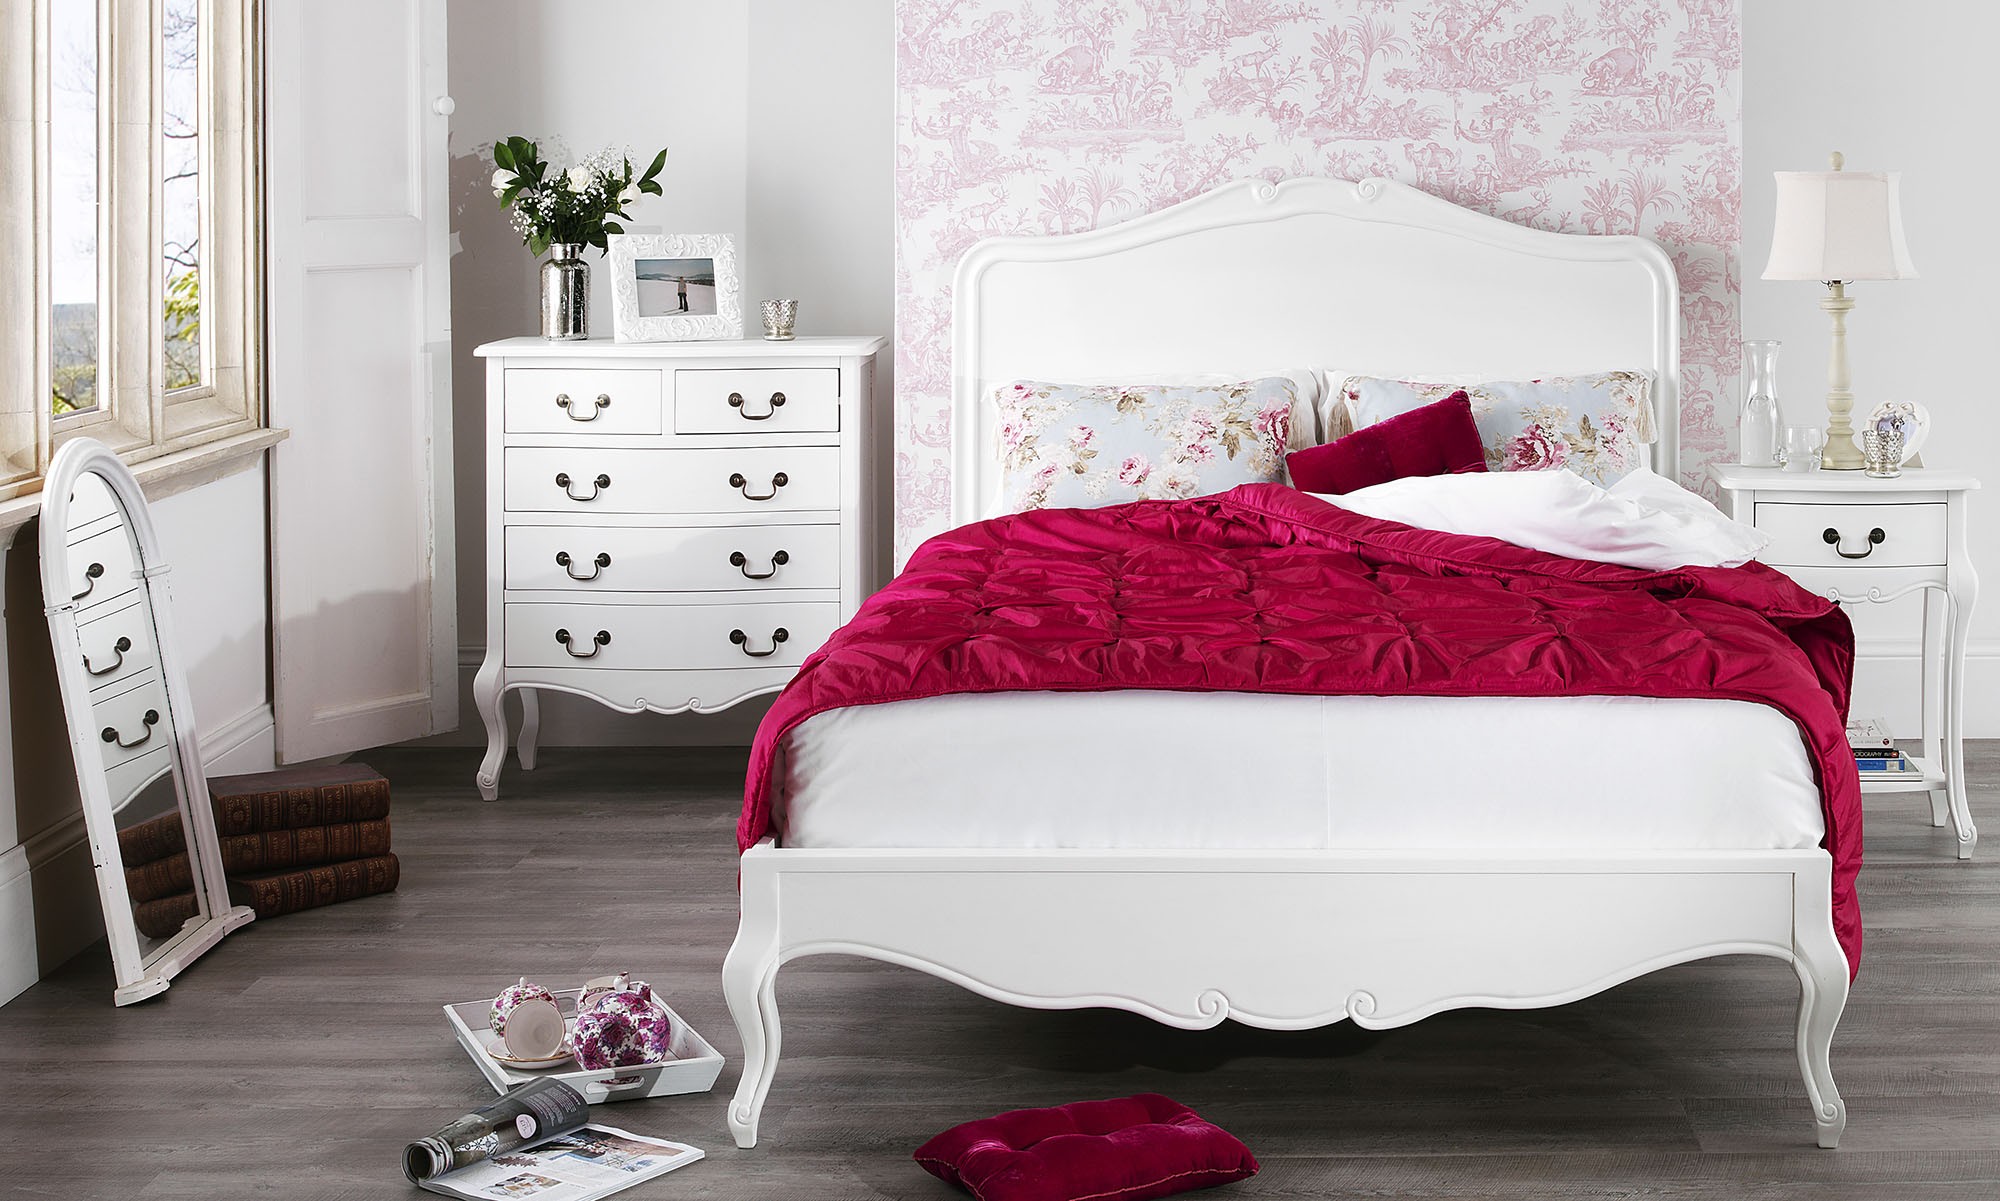 Beautiful brightly antique white refurbished bedroom furniture queen size oak wood bed frame using cabriole legs be equipped chic red and floral patterned bedding also five drawer bedside cabinet and